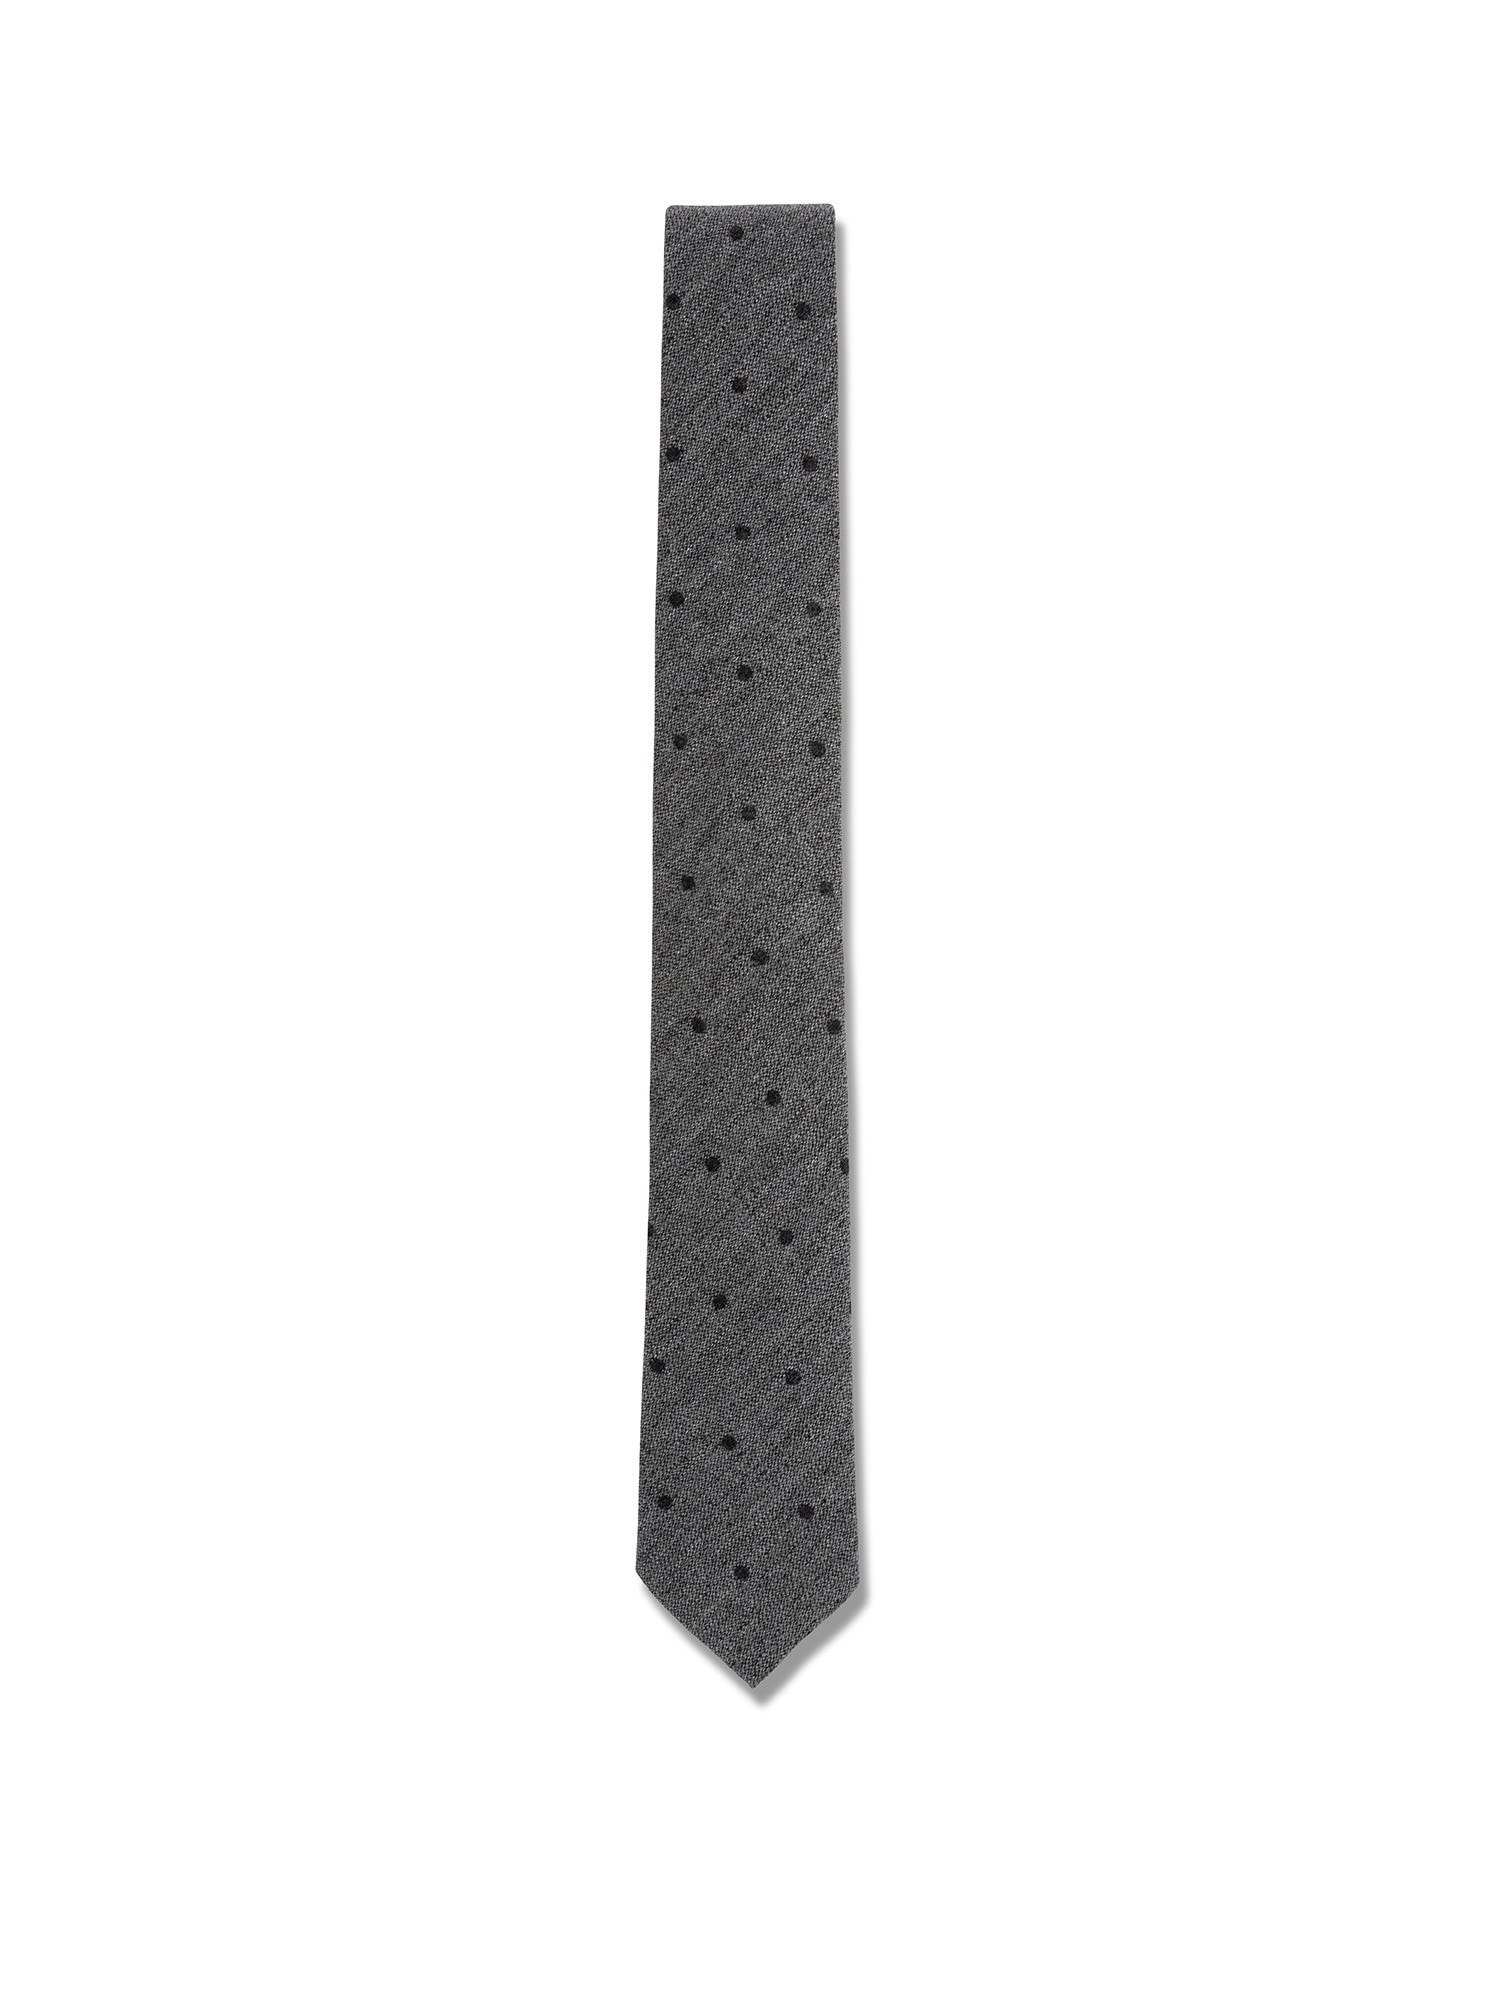 Luca D'Altieri - Patterned wool and silk tie, Grey, large image number 1